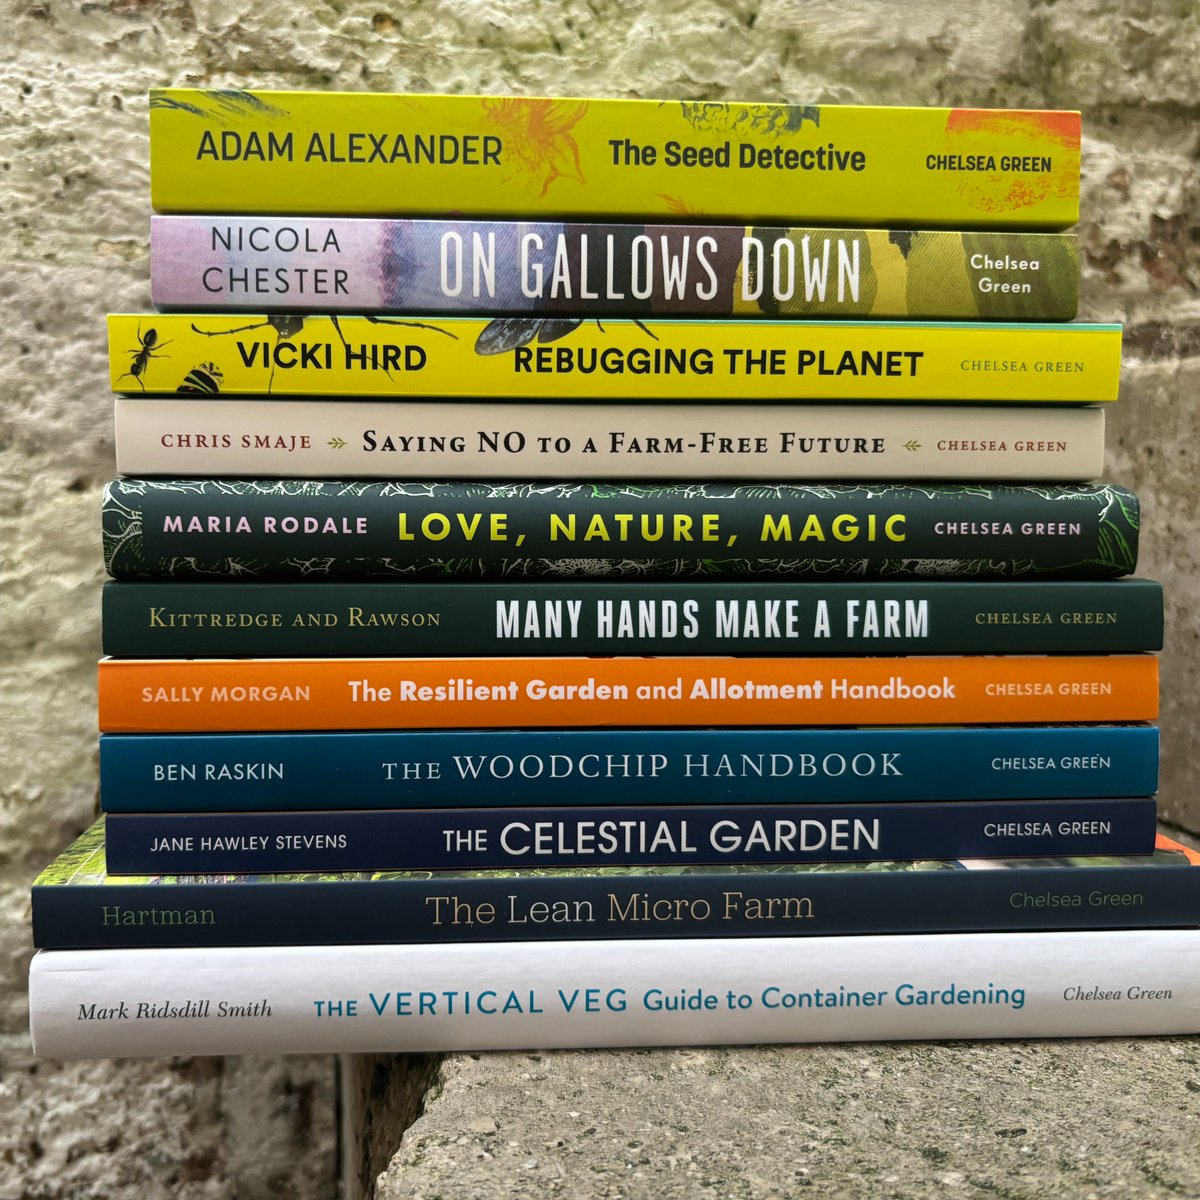 It's #GIVEAWAY TIME! We're teaming up with @SFarms_Gardens to gift this amazing bundle of books! 🌟To enter all you need to do is: 1. Sign up to our UK newsletter, link in bio 2. Sign up for your free @SFarms_Gardens's membership - visit farmgarden.org.uk/join-us 3. Share this…